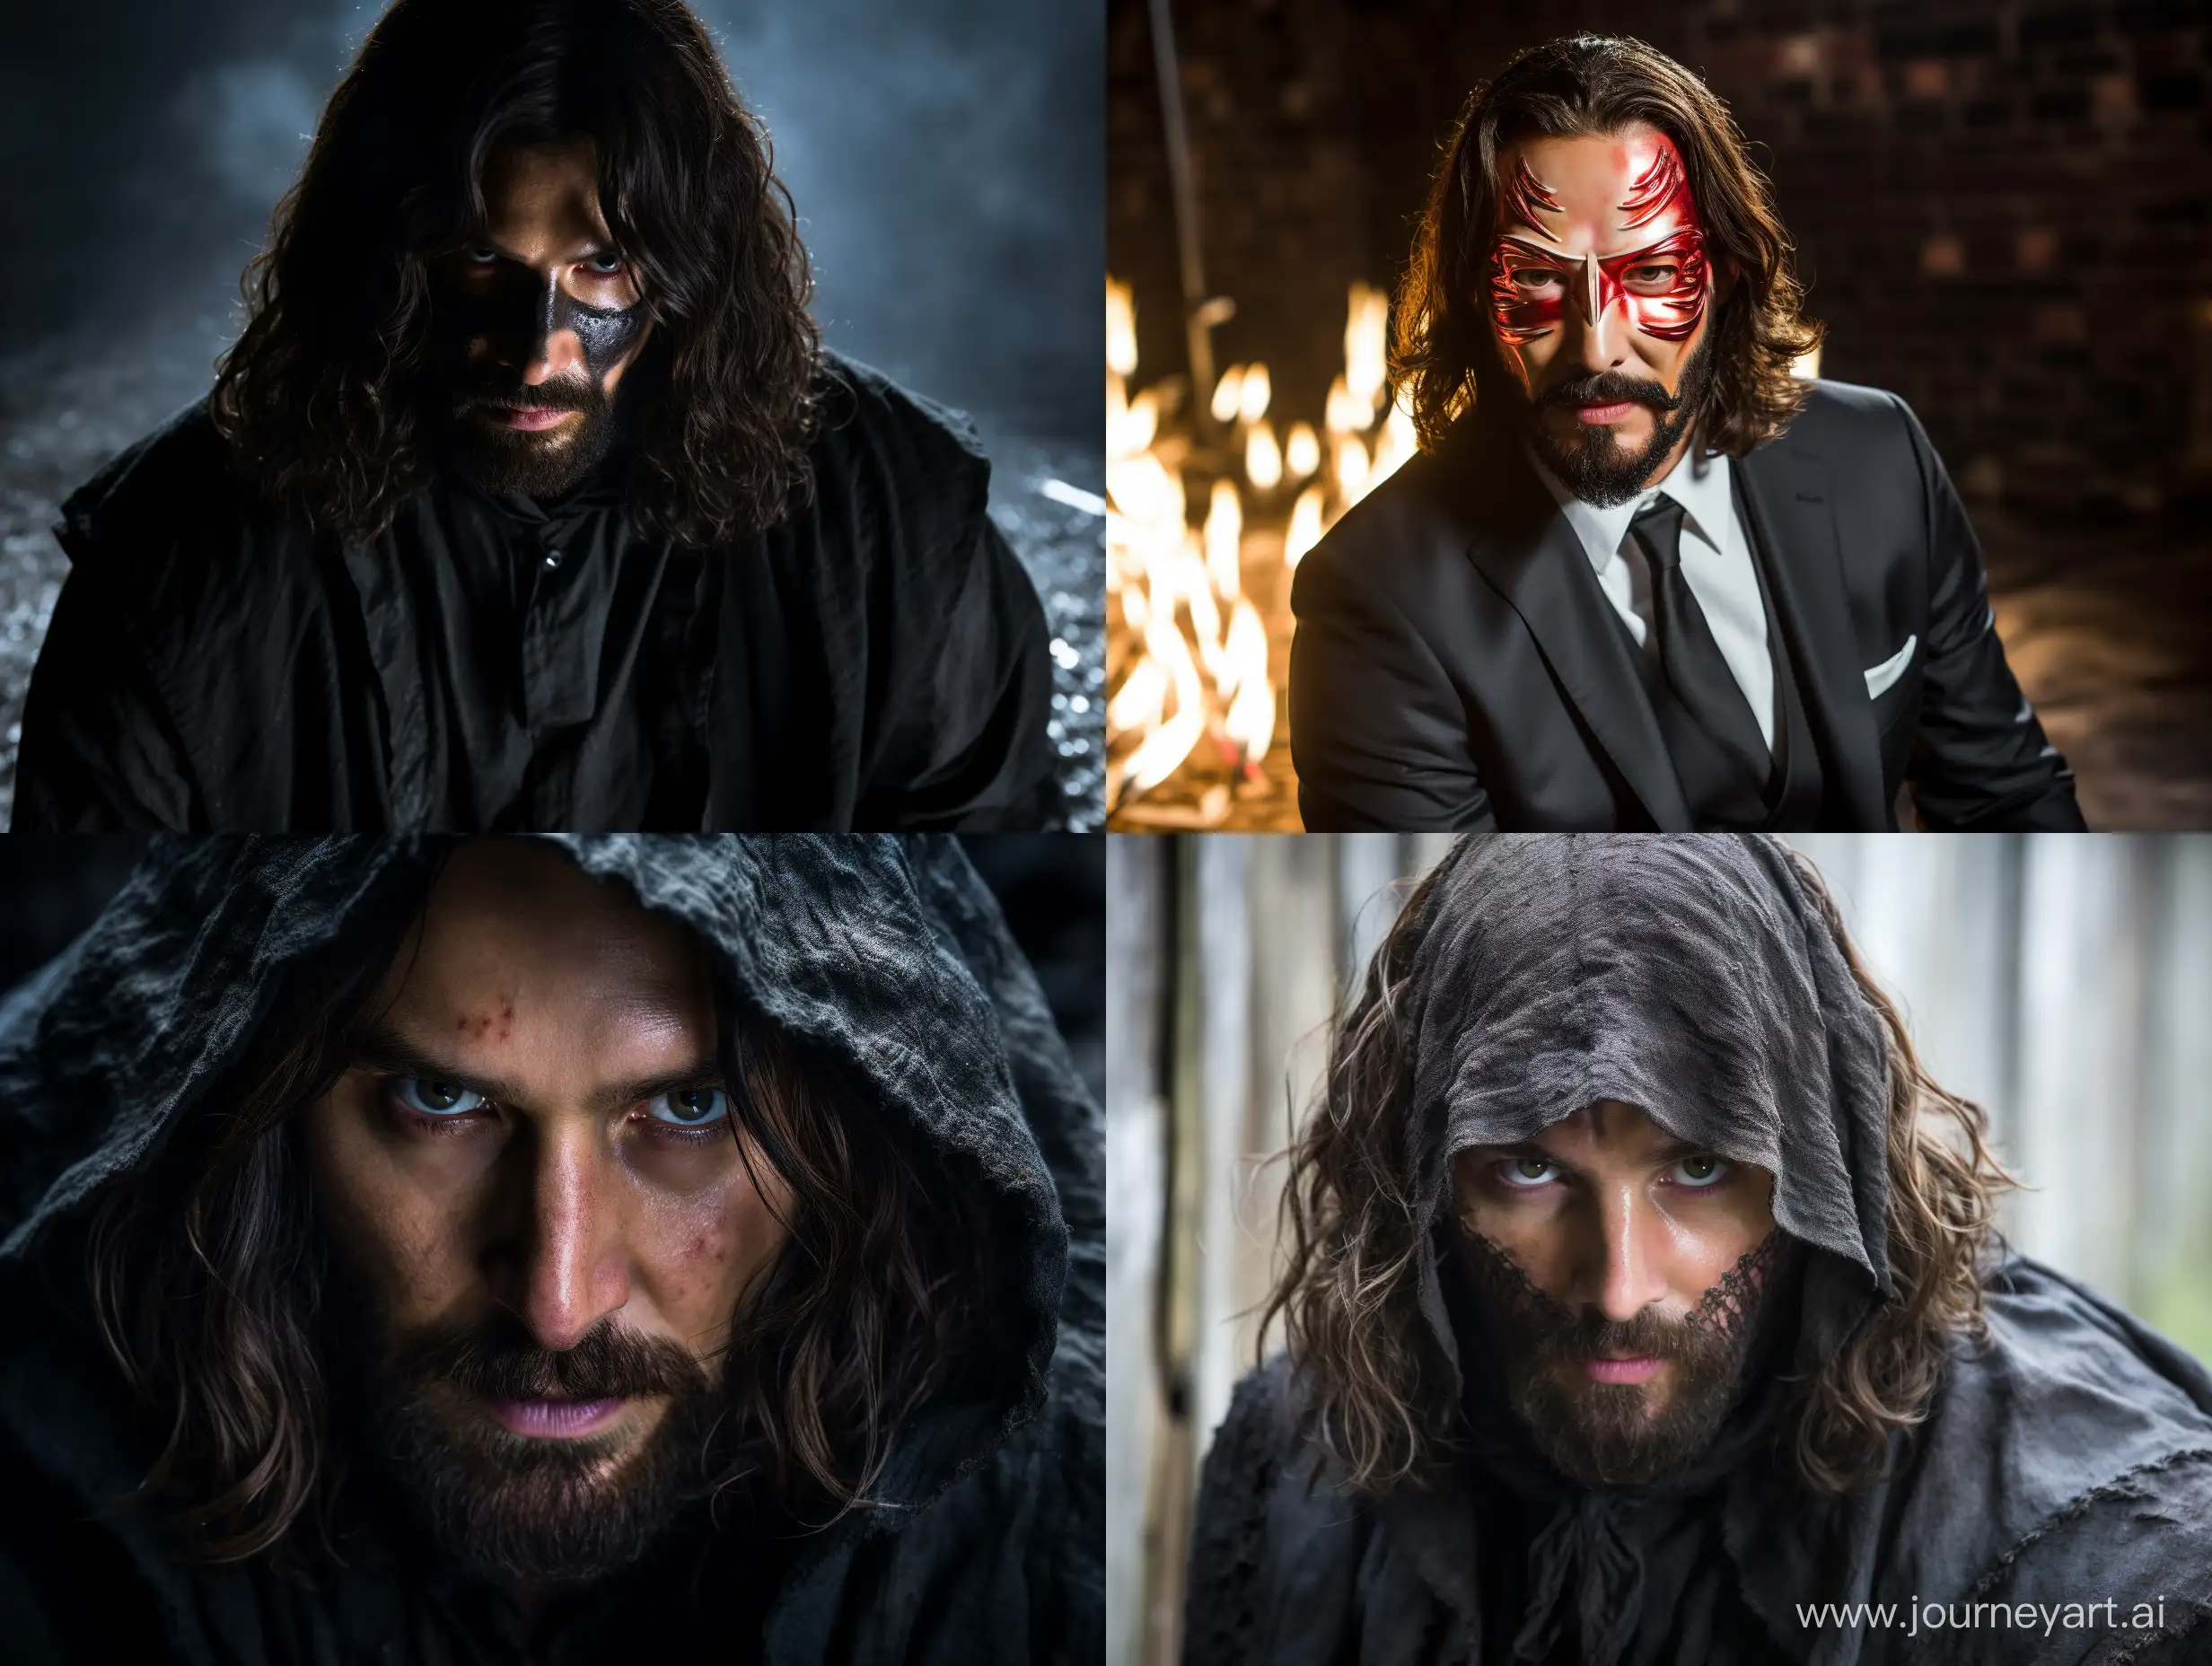 In this bright and unusual picture we see the most crushing killer in history - John Wick, but this time he has a little "somber" secret. On his face he wears not just a mask, but a magic mask that turns him into the invincible Guy Fawkes! Look at his painted eyes, wide open in breathtaking amazement that such a mask not only gives him attraction, but also endows him with countless powers. They calmly stare straight into the viewer's soul, as if to say, "You thought John Wick was already incredible? Just wait until you see my new stunts!". Everyone should be on guard, because the real good laughs are just beginning when John Wick and Guy Fawkes join forces!